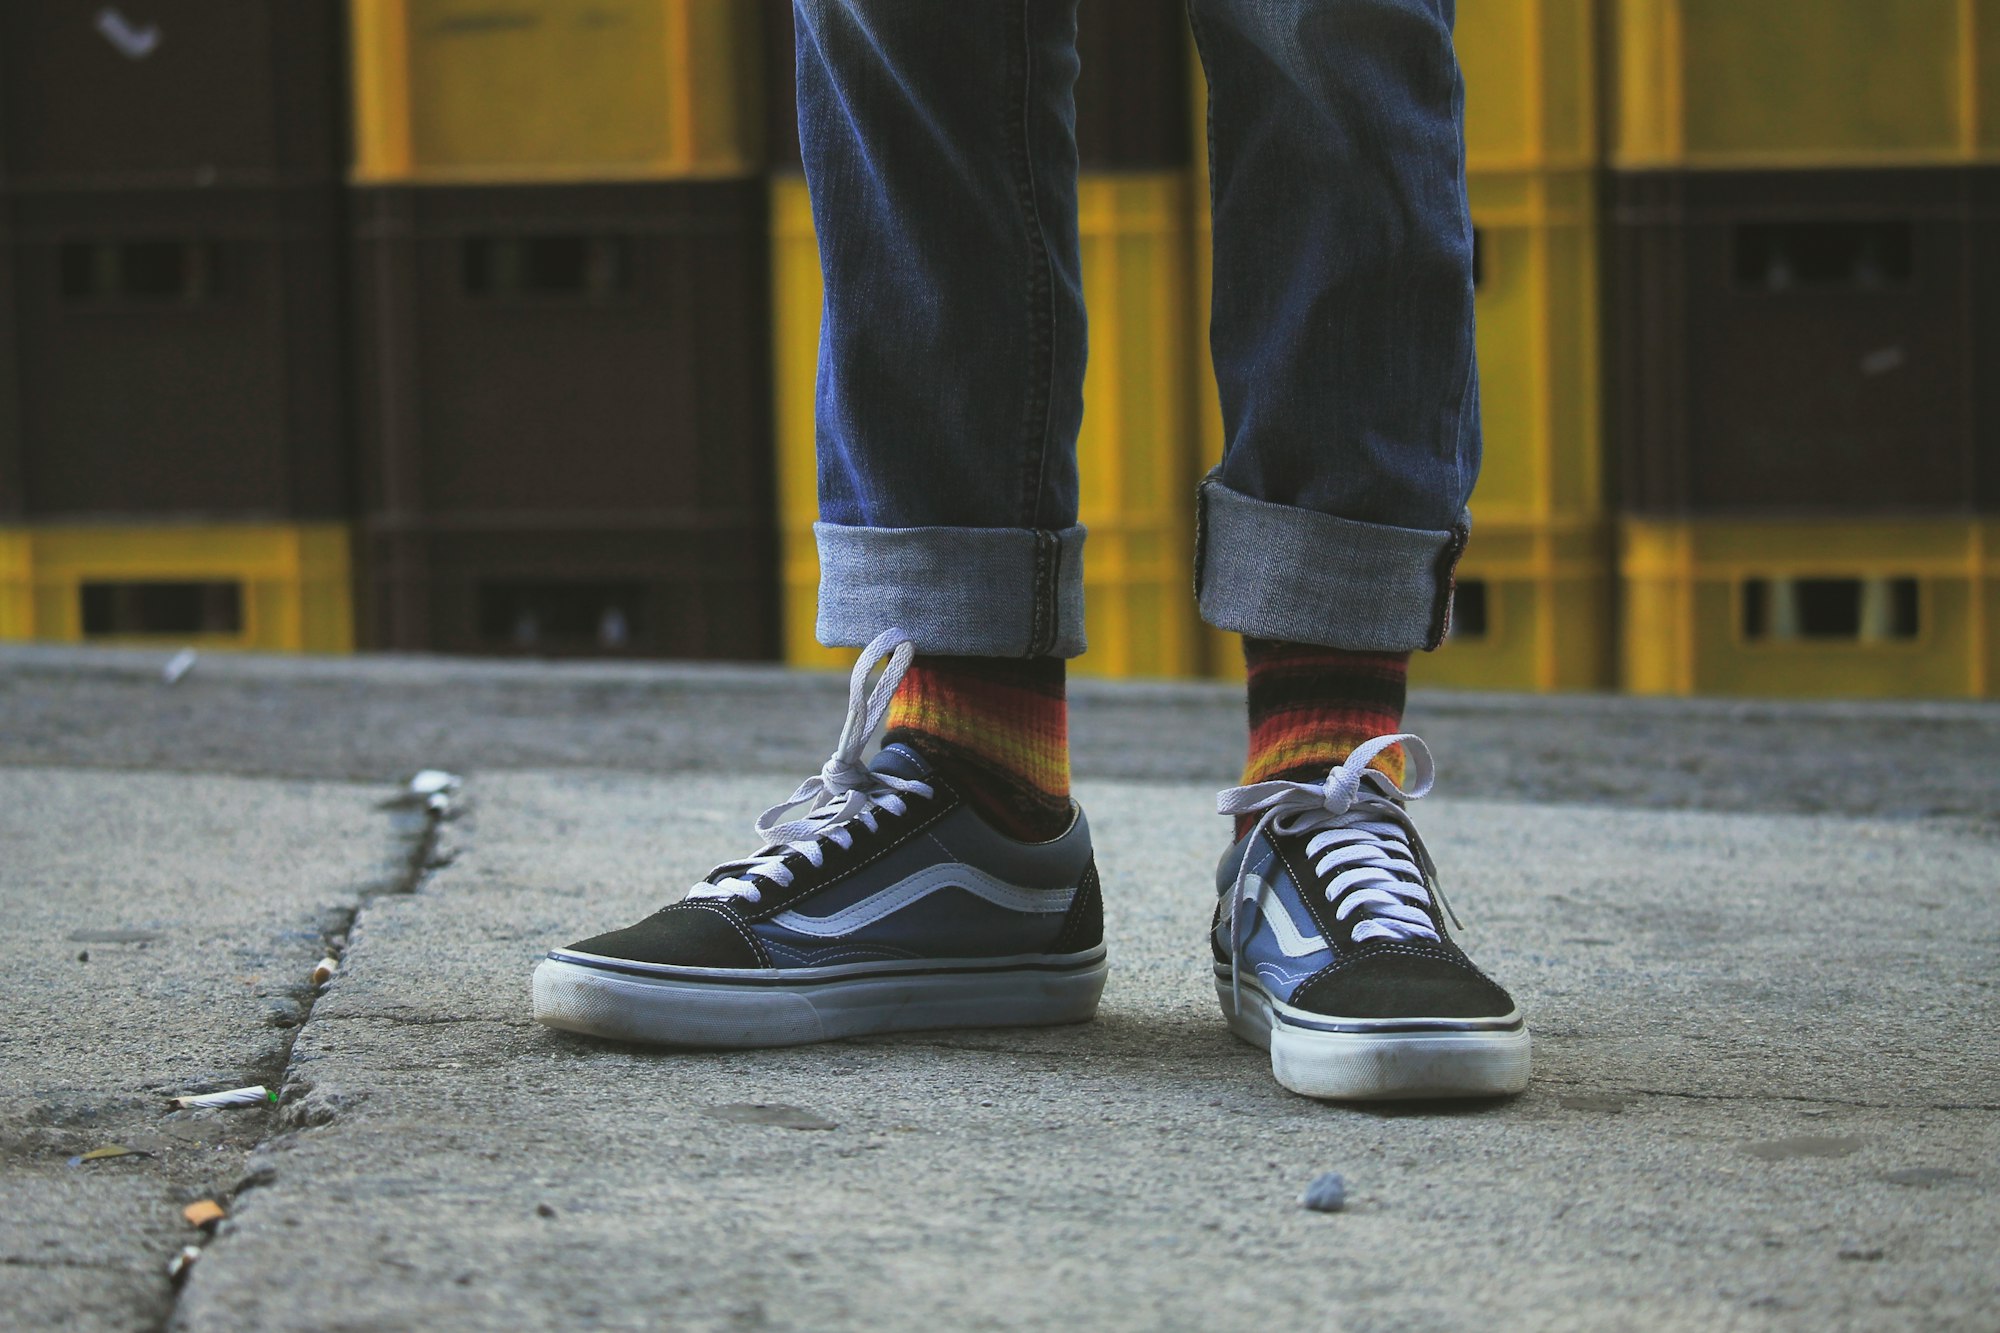 Vans Good Shoes? The Unexpected Truth